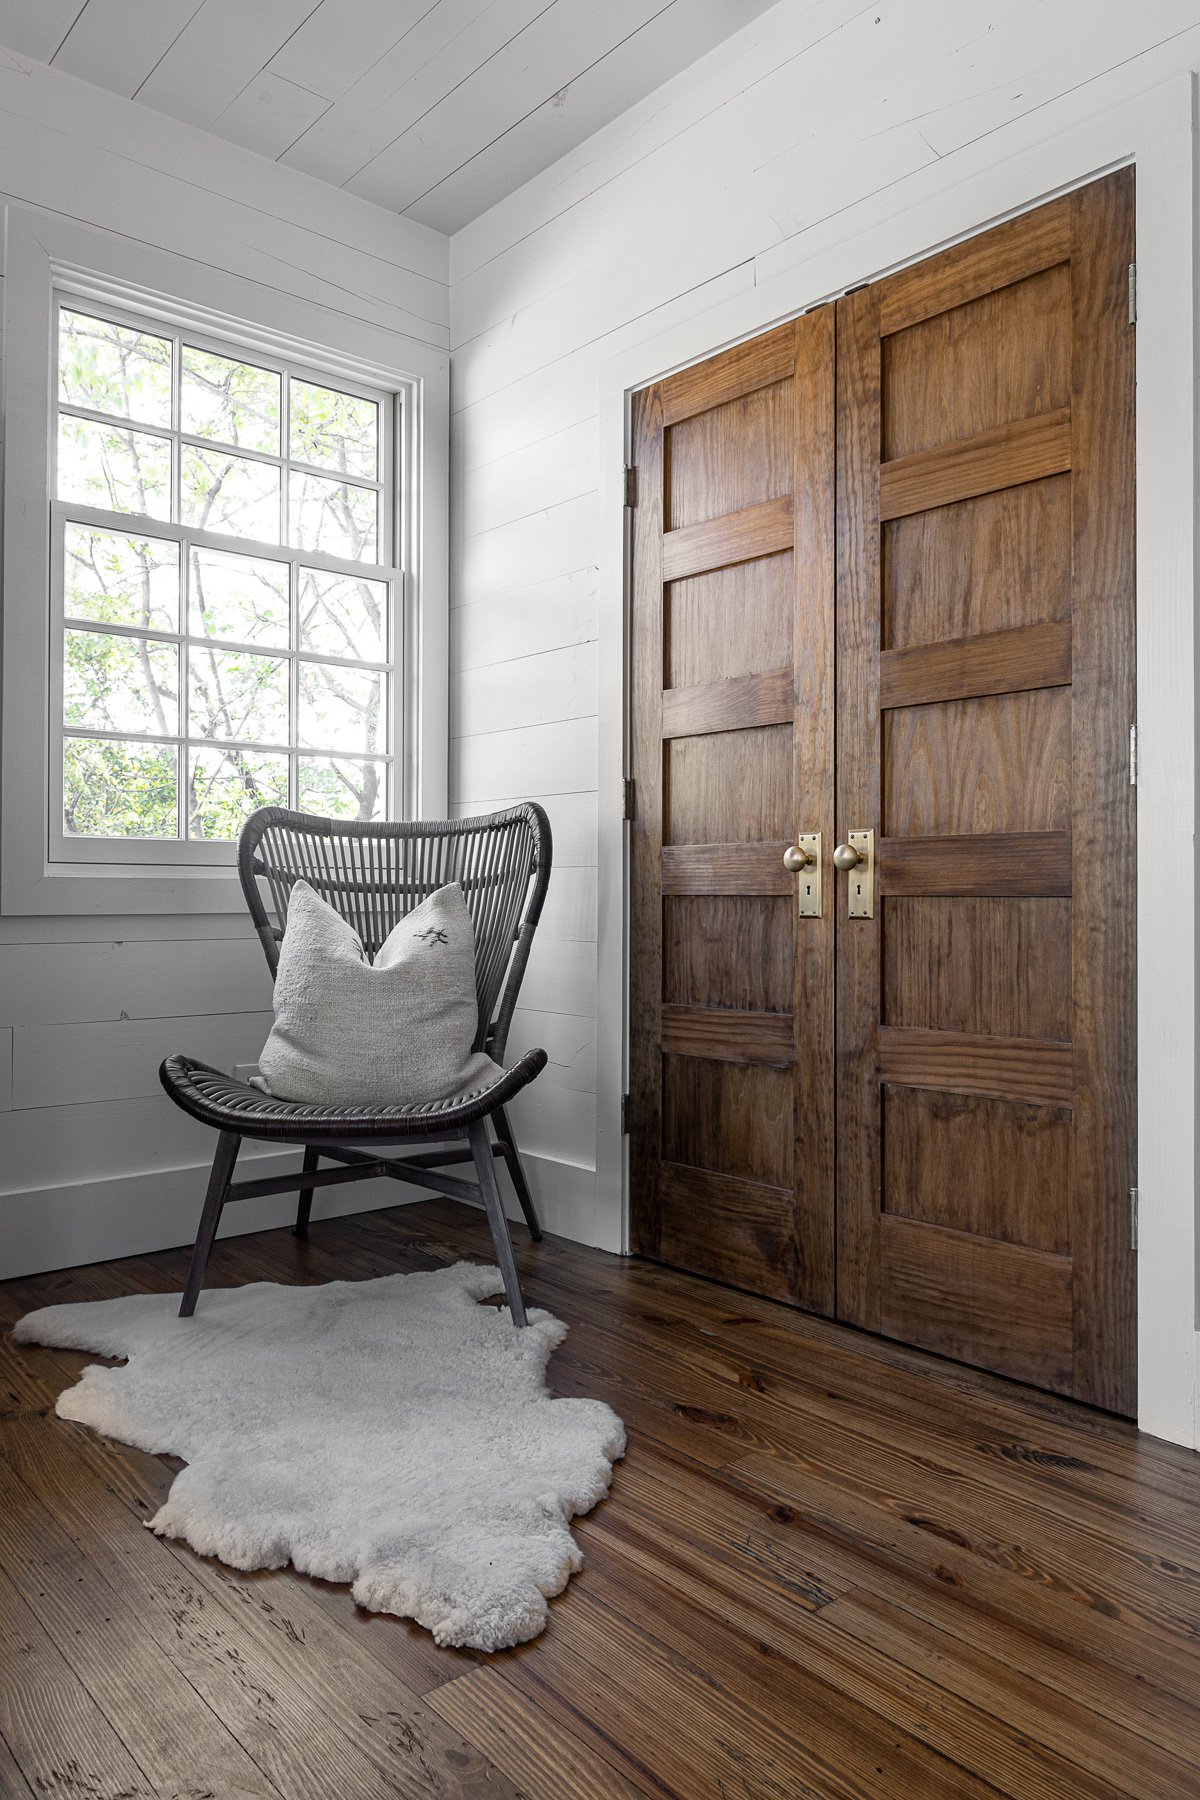 Inviting reading nook with a wicker chair, plush sheepskin rug, and rustic wooden doors.